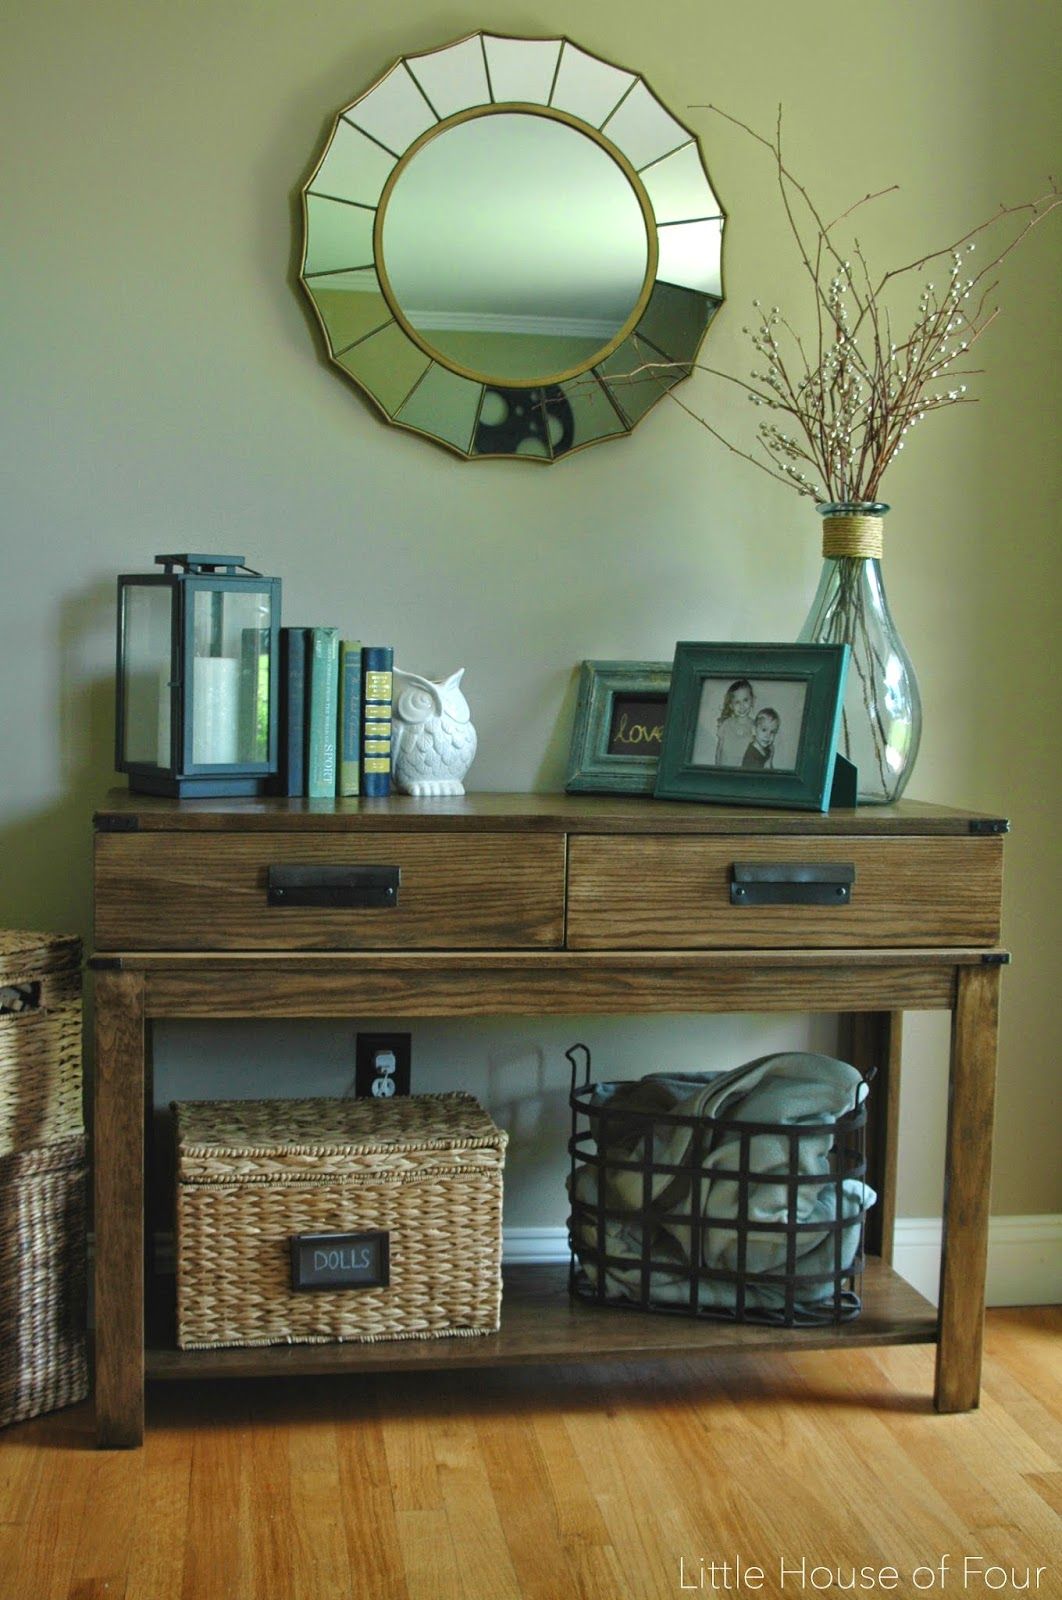 west elm inspired homegoods table makeover for the home house accent ideas stain metal accents and custom made bin pulls over this find resemble chair legs clear coffee dark green